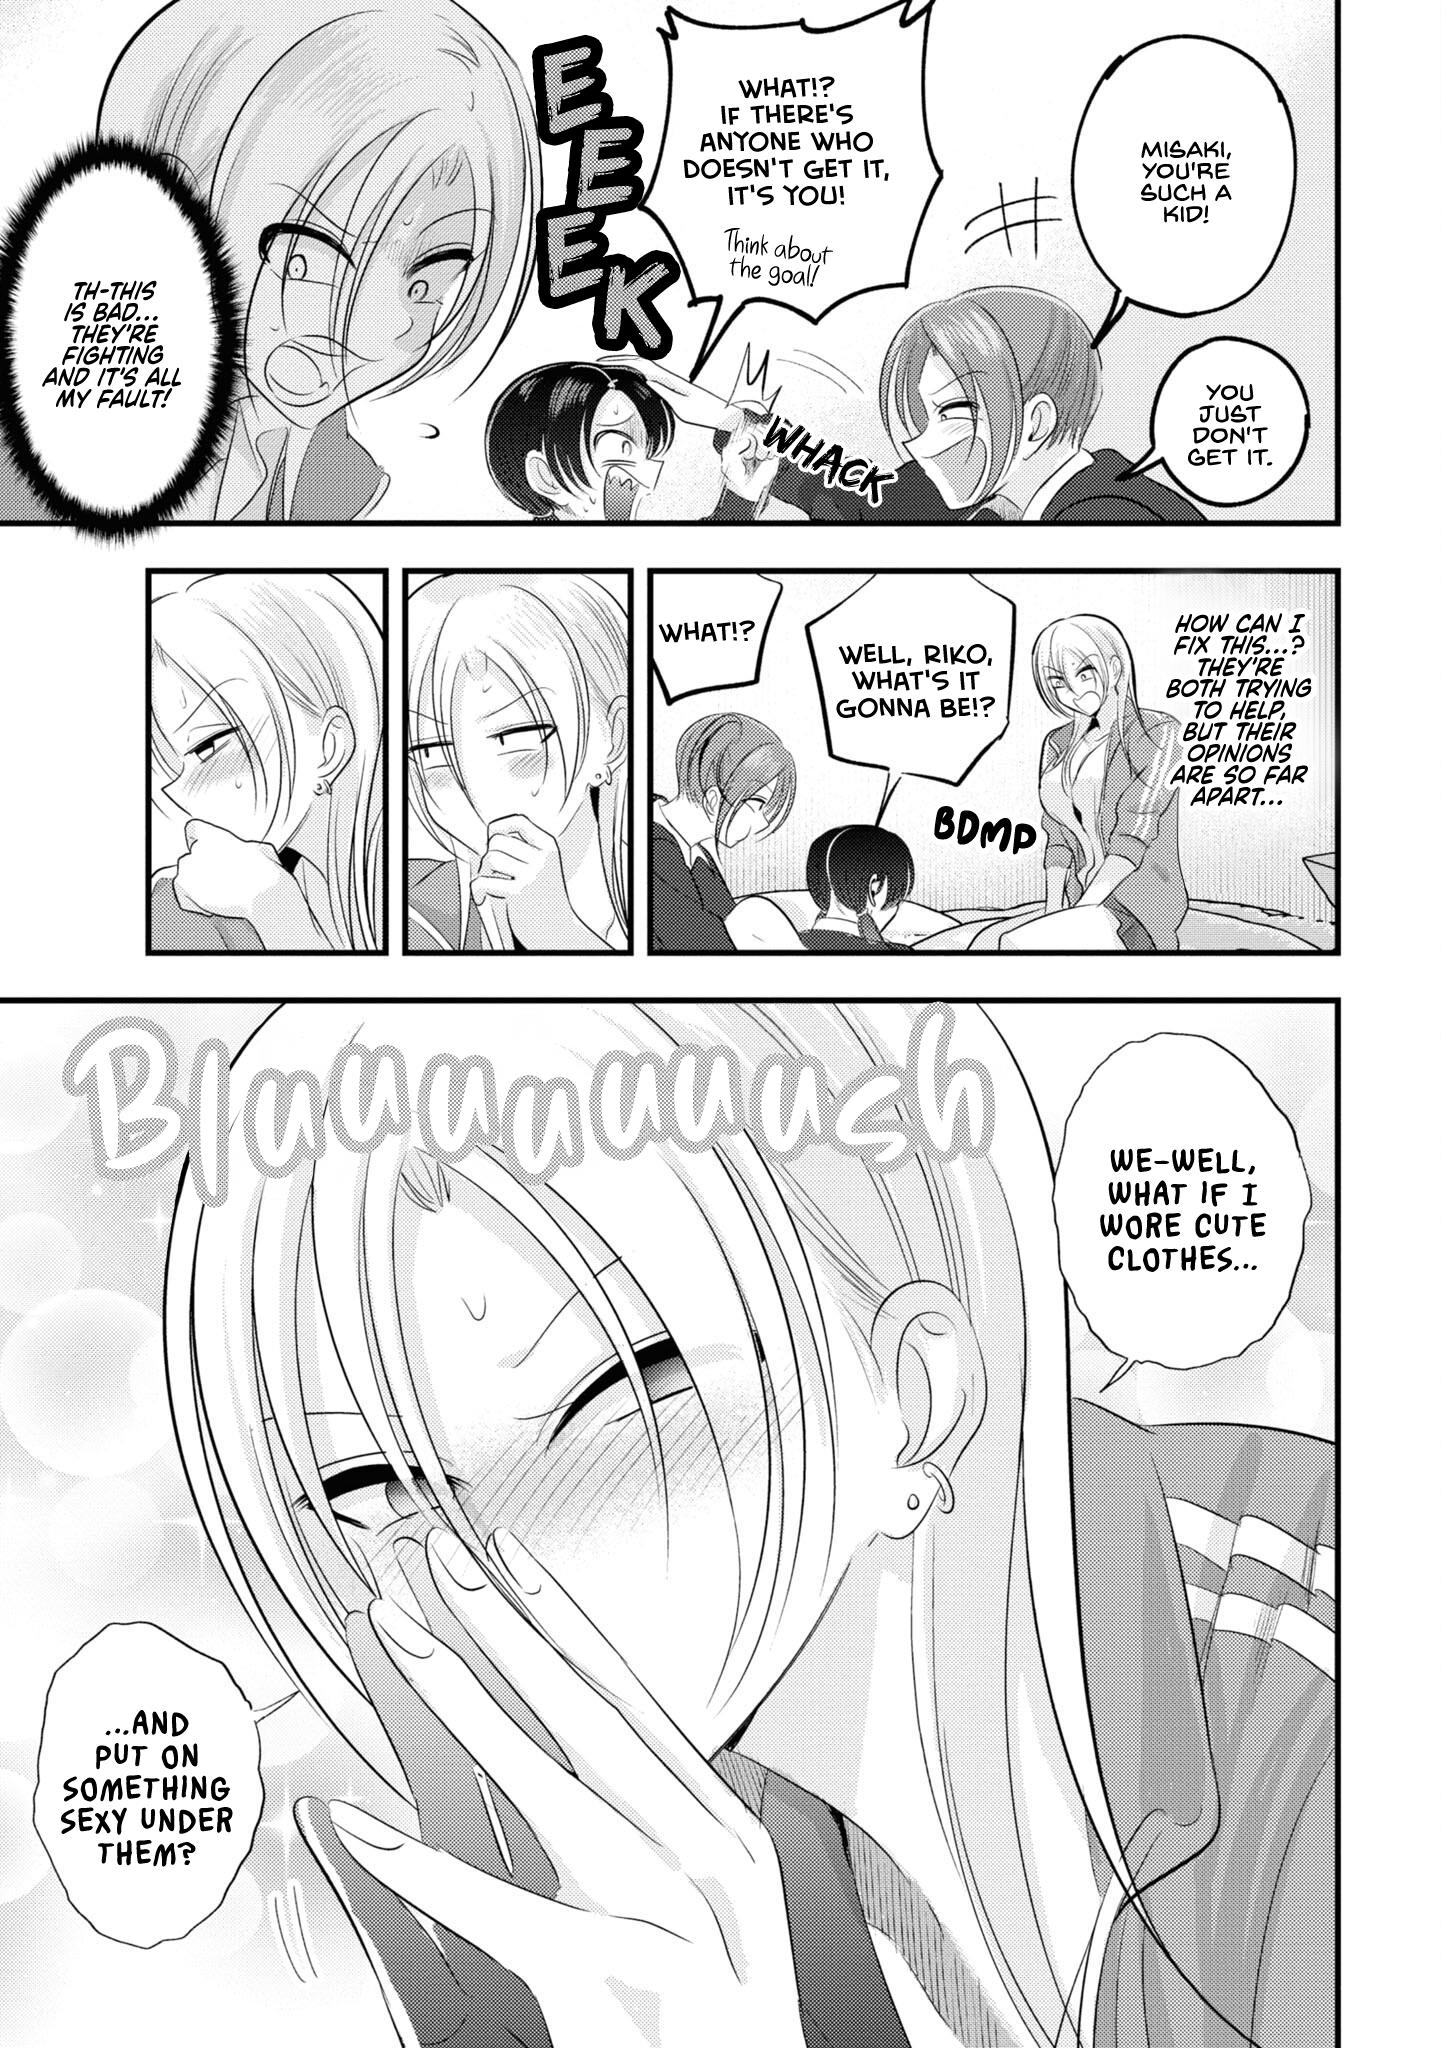 Please Go Home, Akutsu-San! Vol.8 Chapter 158.1: Extra 1 - Picture 3